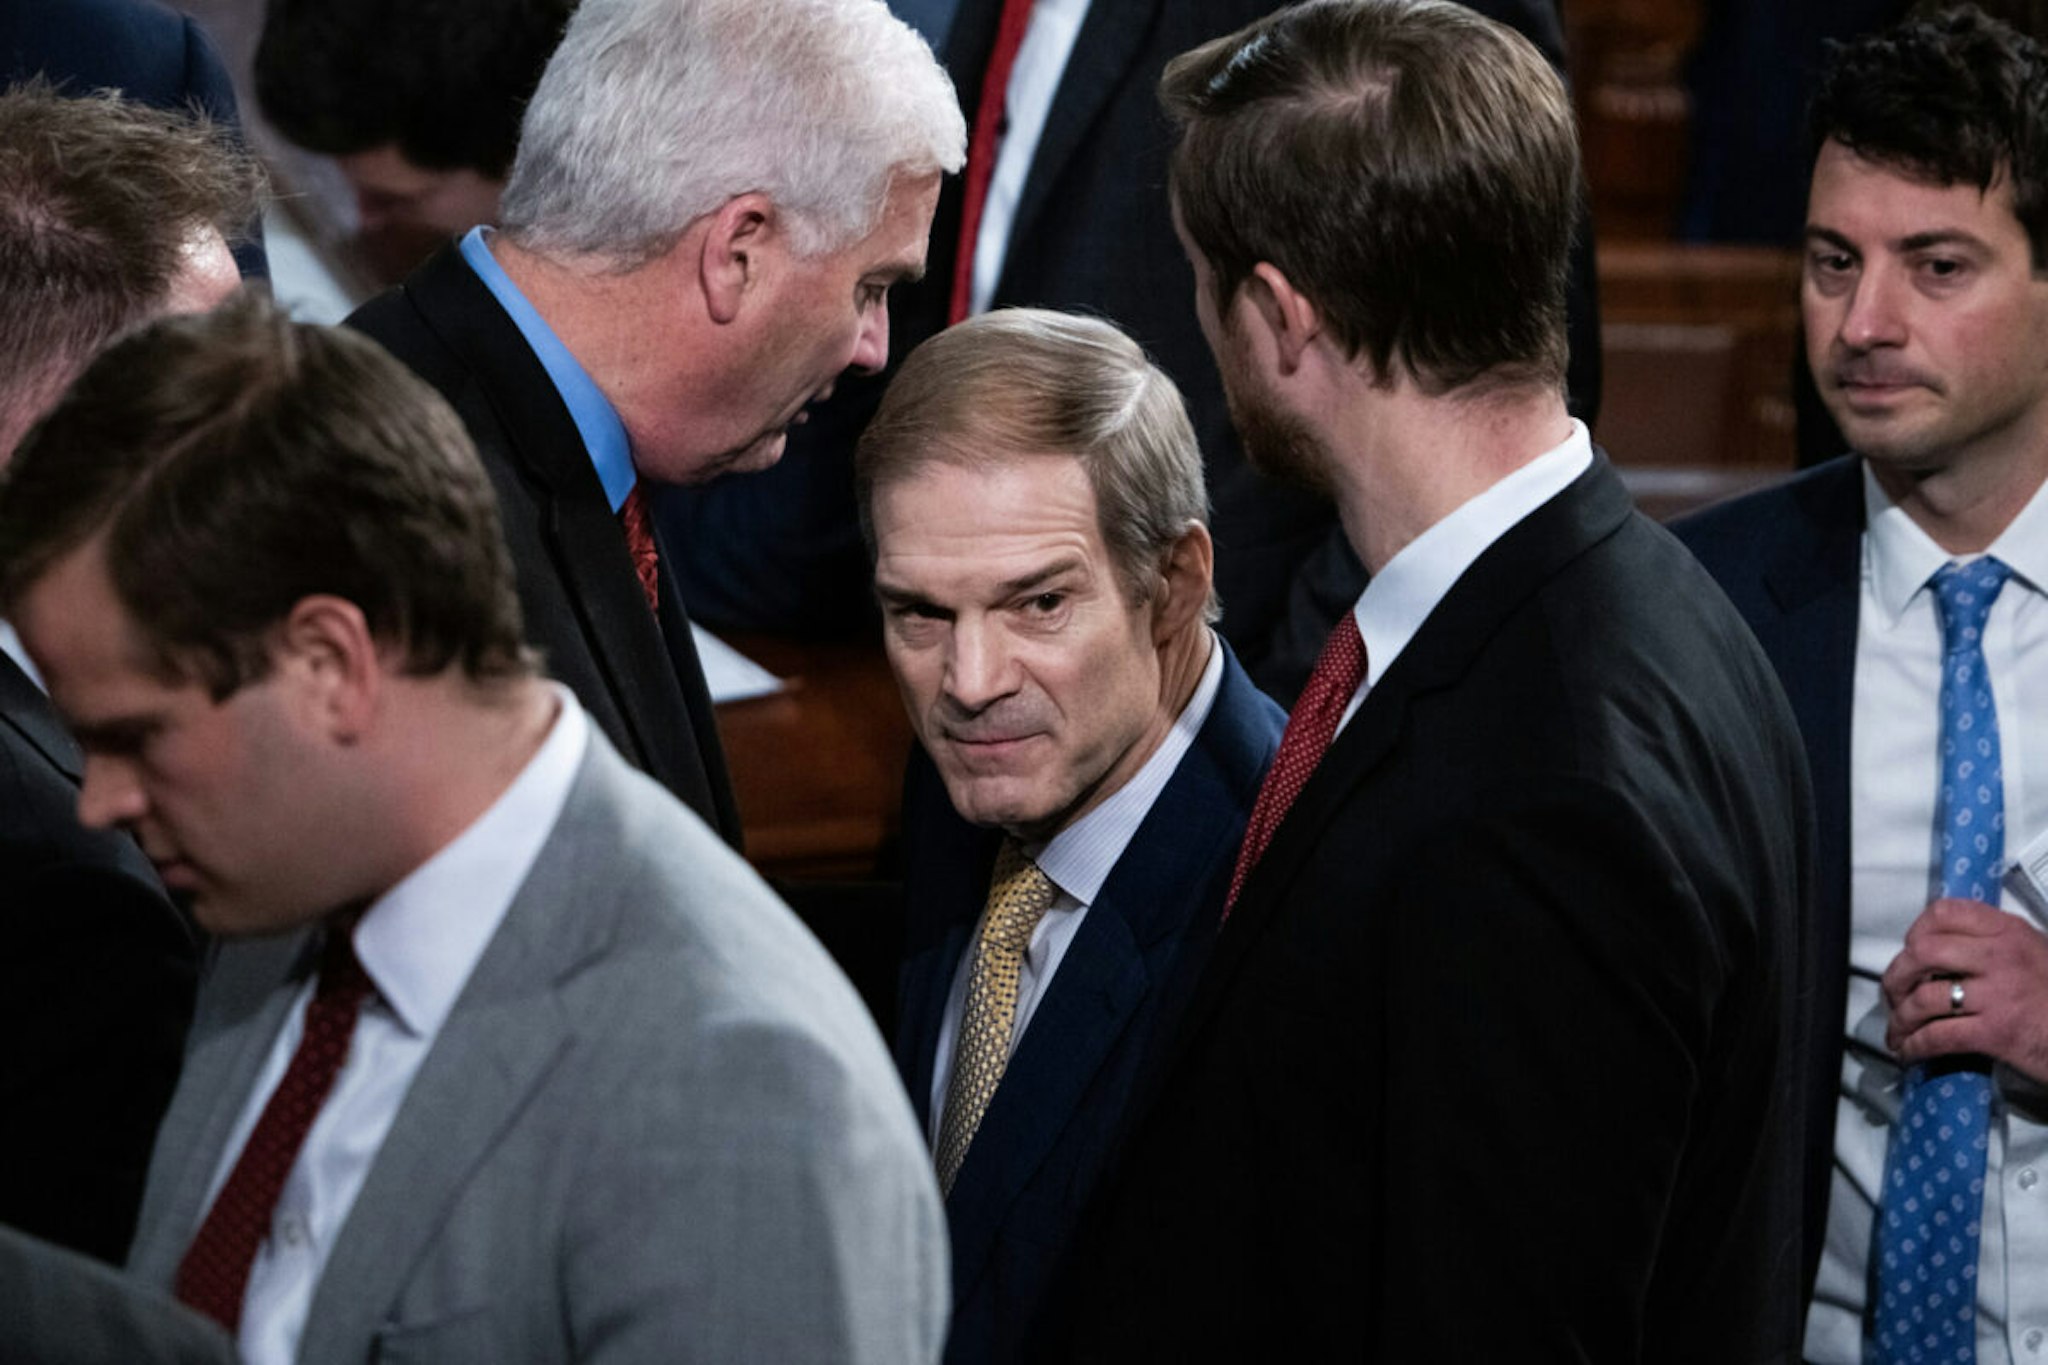 Rep. Jim Jordan, R-Ohio, center, the Republican nominee for speaker of the House, is seen on the House floor of the U.S. Capitol after he did not receive enough votes to become speaker on Tuesday, October 17, 2023.